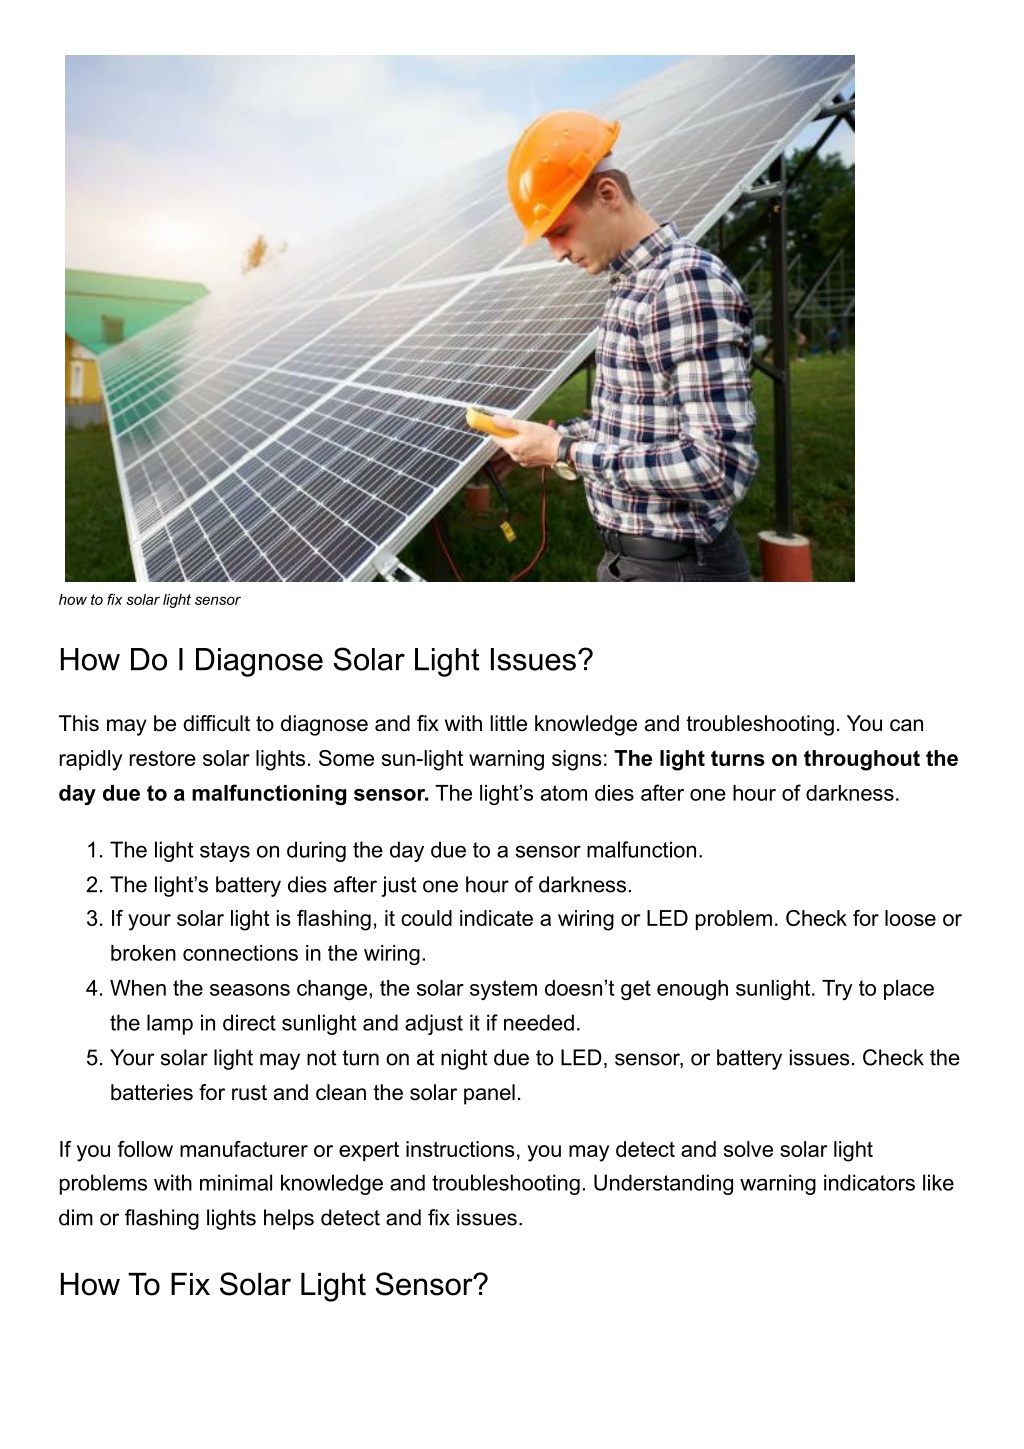 Solar Lights Not Working? Find Out How To Fix Them